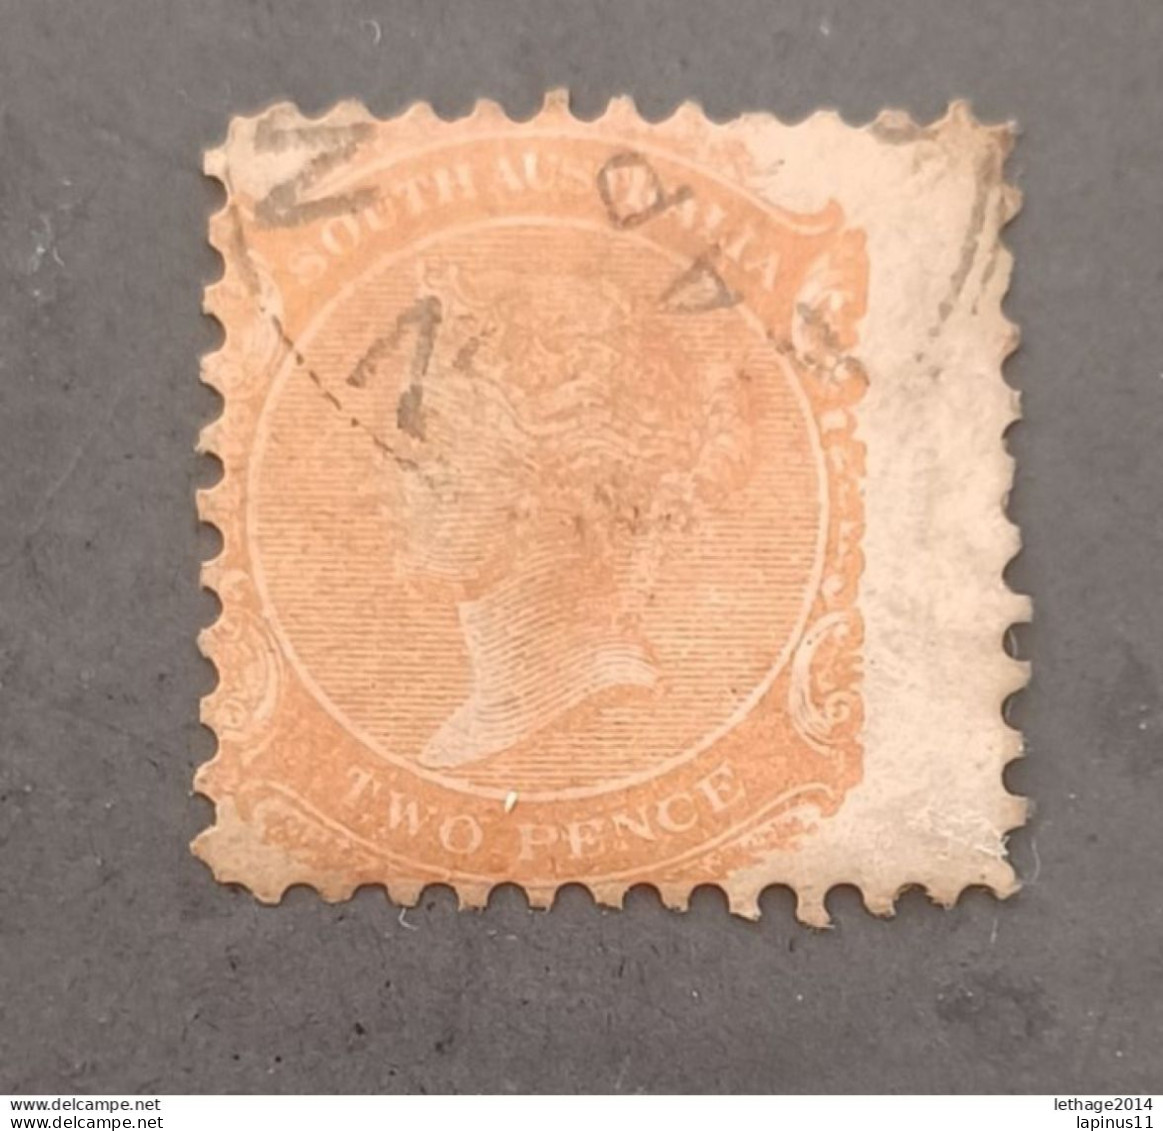 SOUTH AUSTRALIA 1868 QUEEN VICTORIA CAT GIBBONS N 157 PERF 9 VARIETY OF DRILLING, AND MEASUREMENT ERROR - Gebraucht